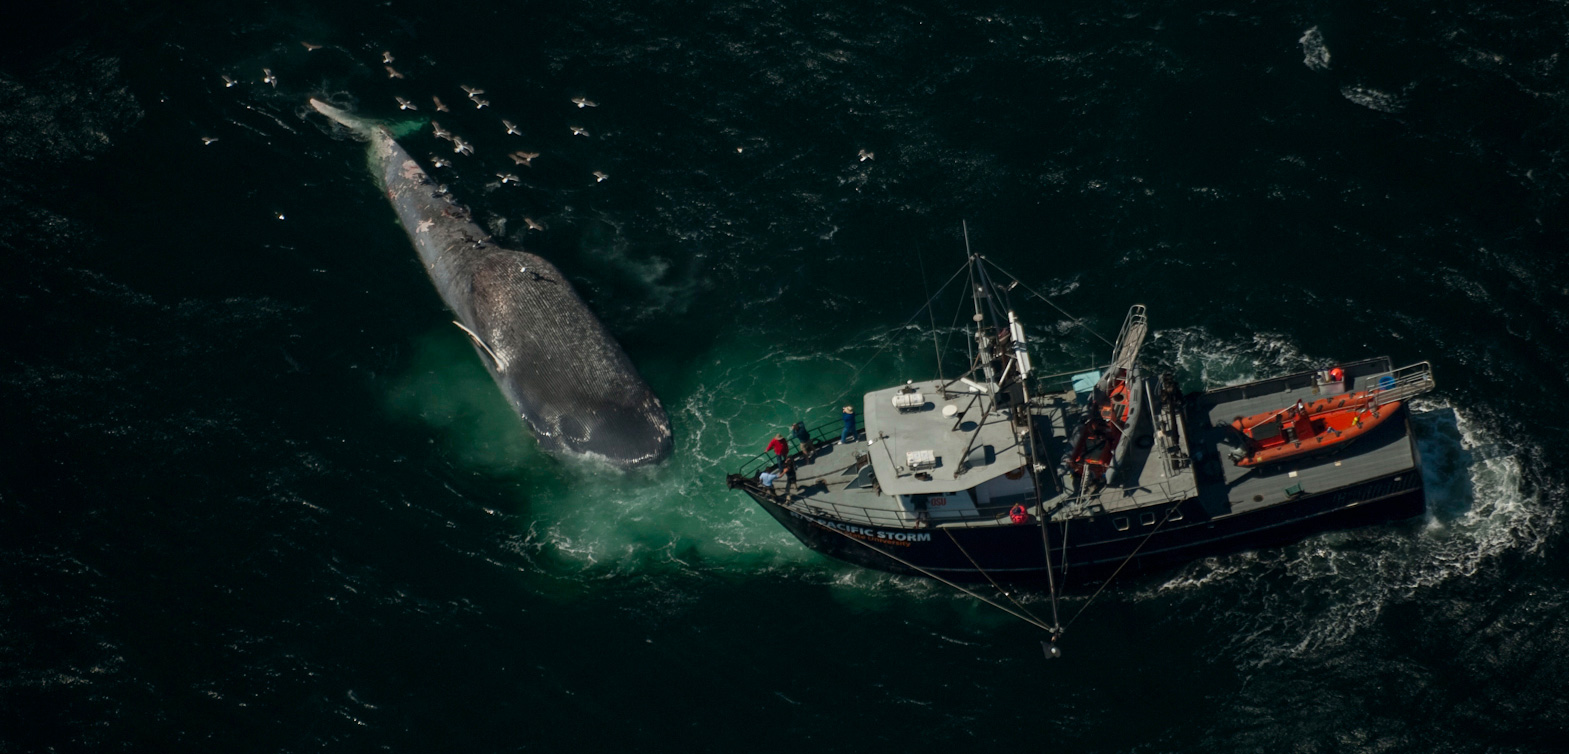 dead blue whale and research vessel from above